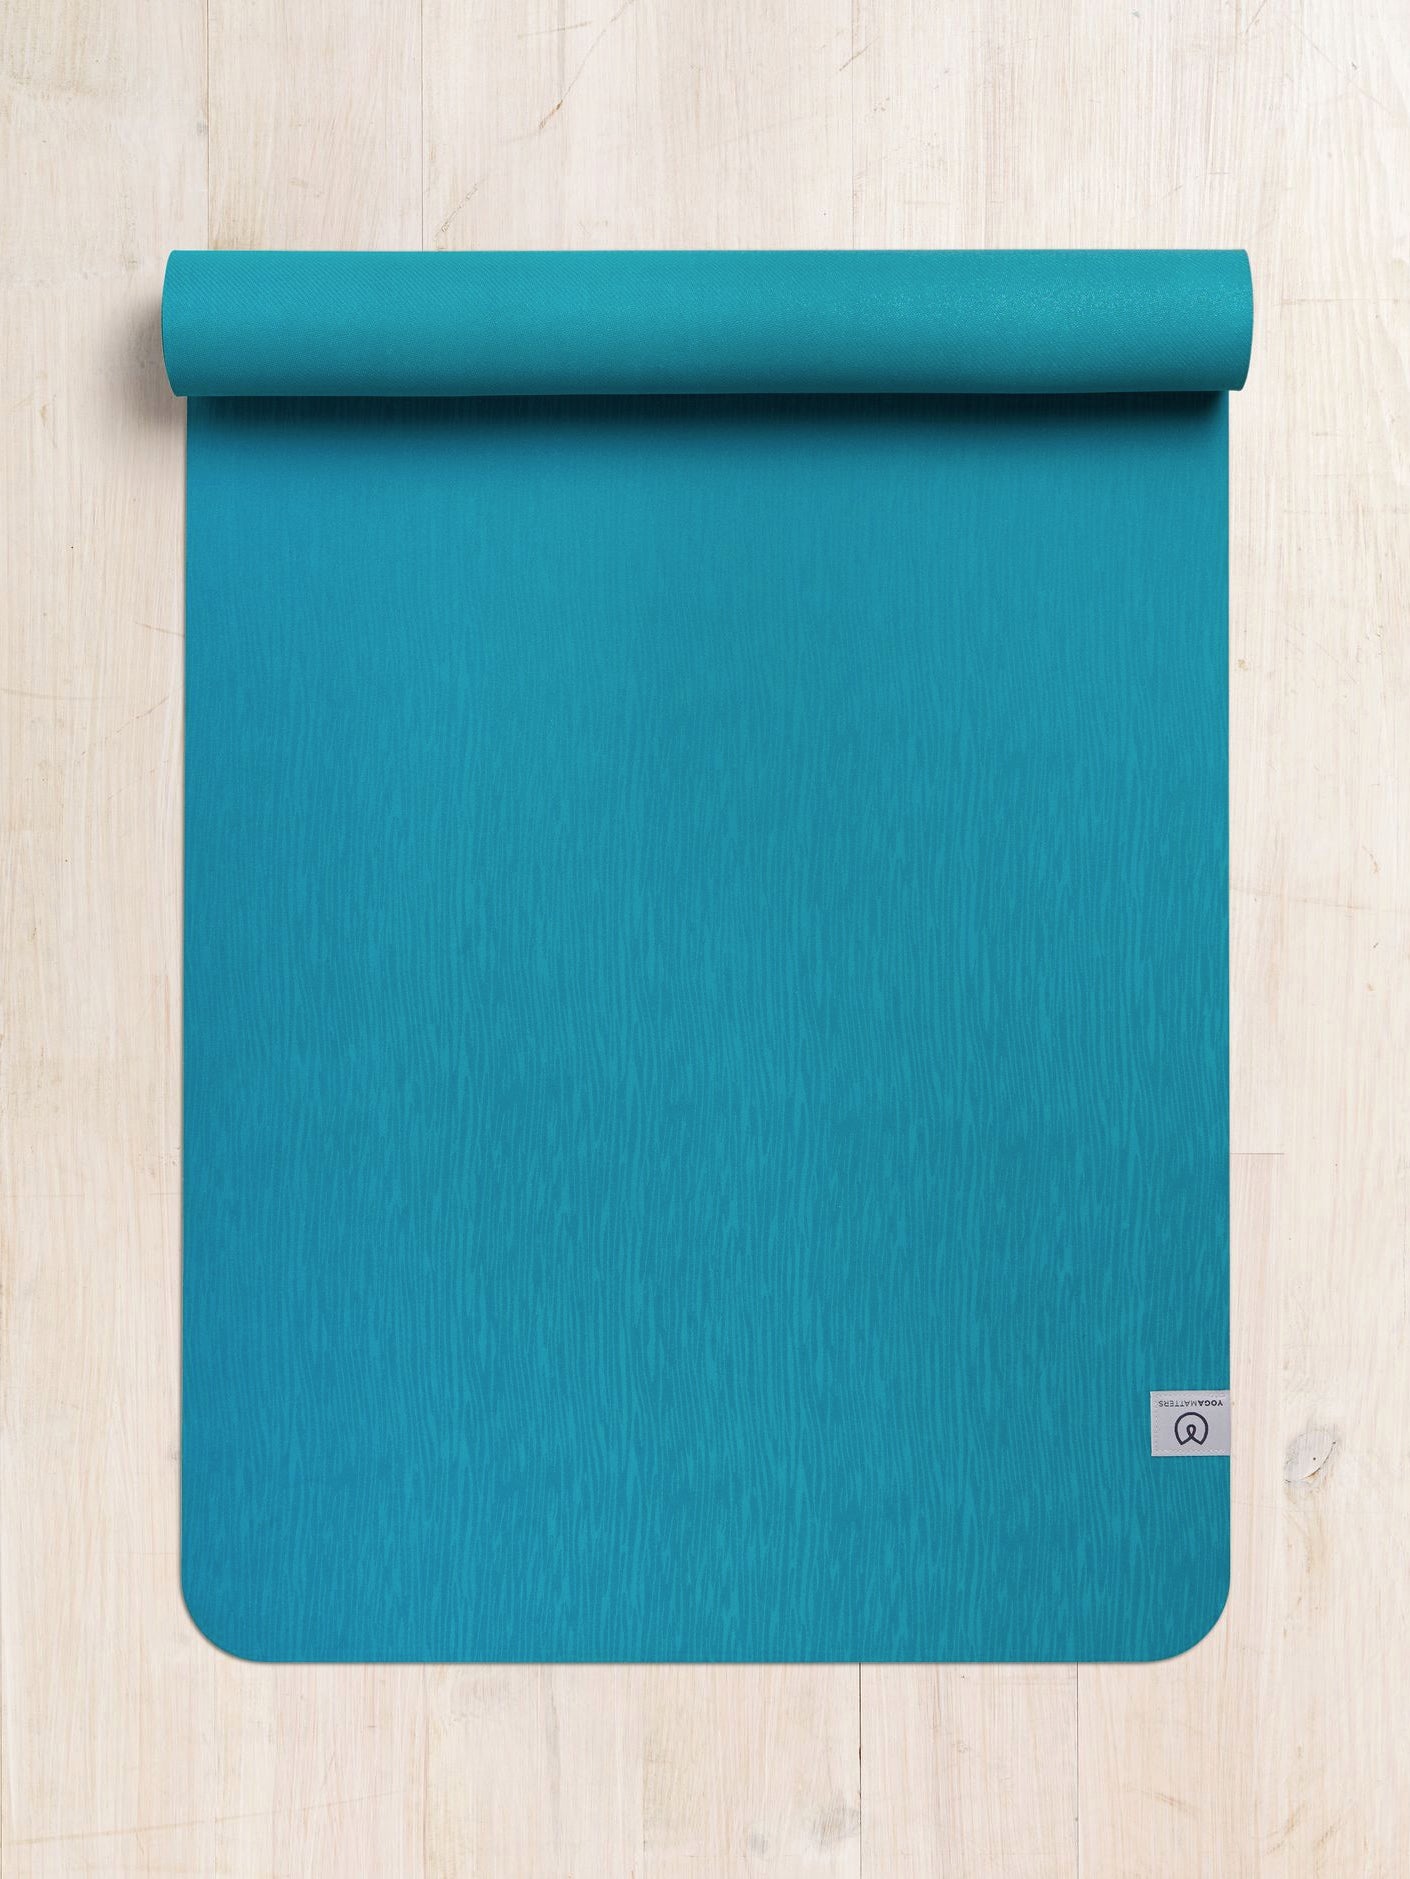 Teal yoga mat partially rolled up on a wooden floor, textured non-slip surface, top view